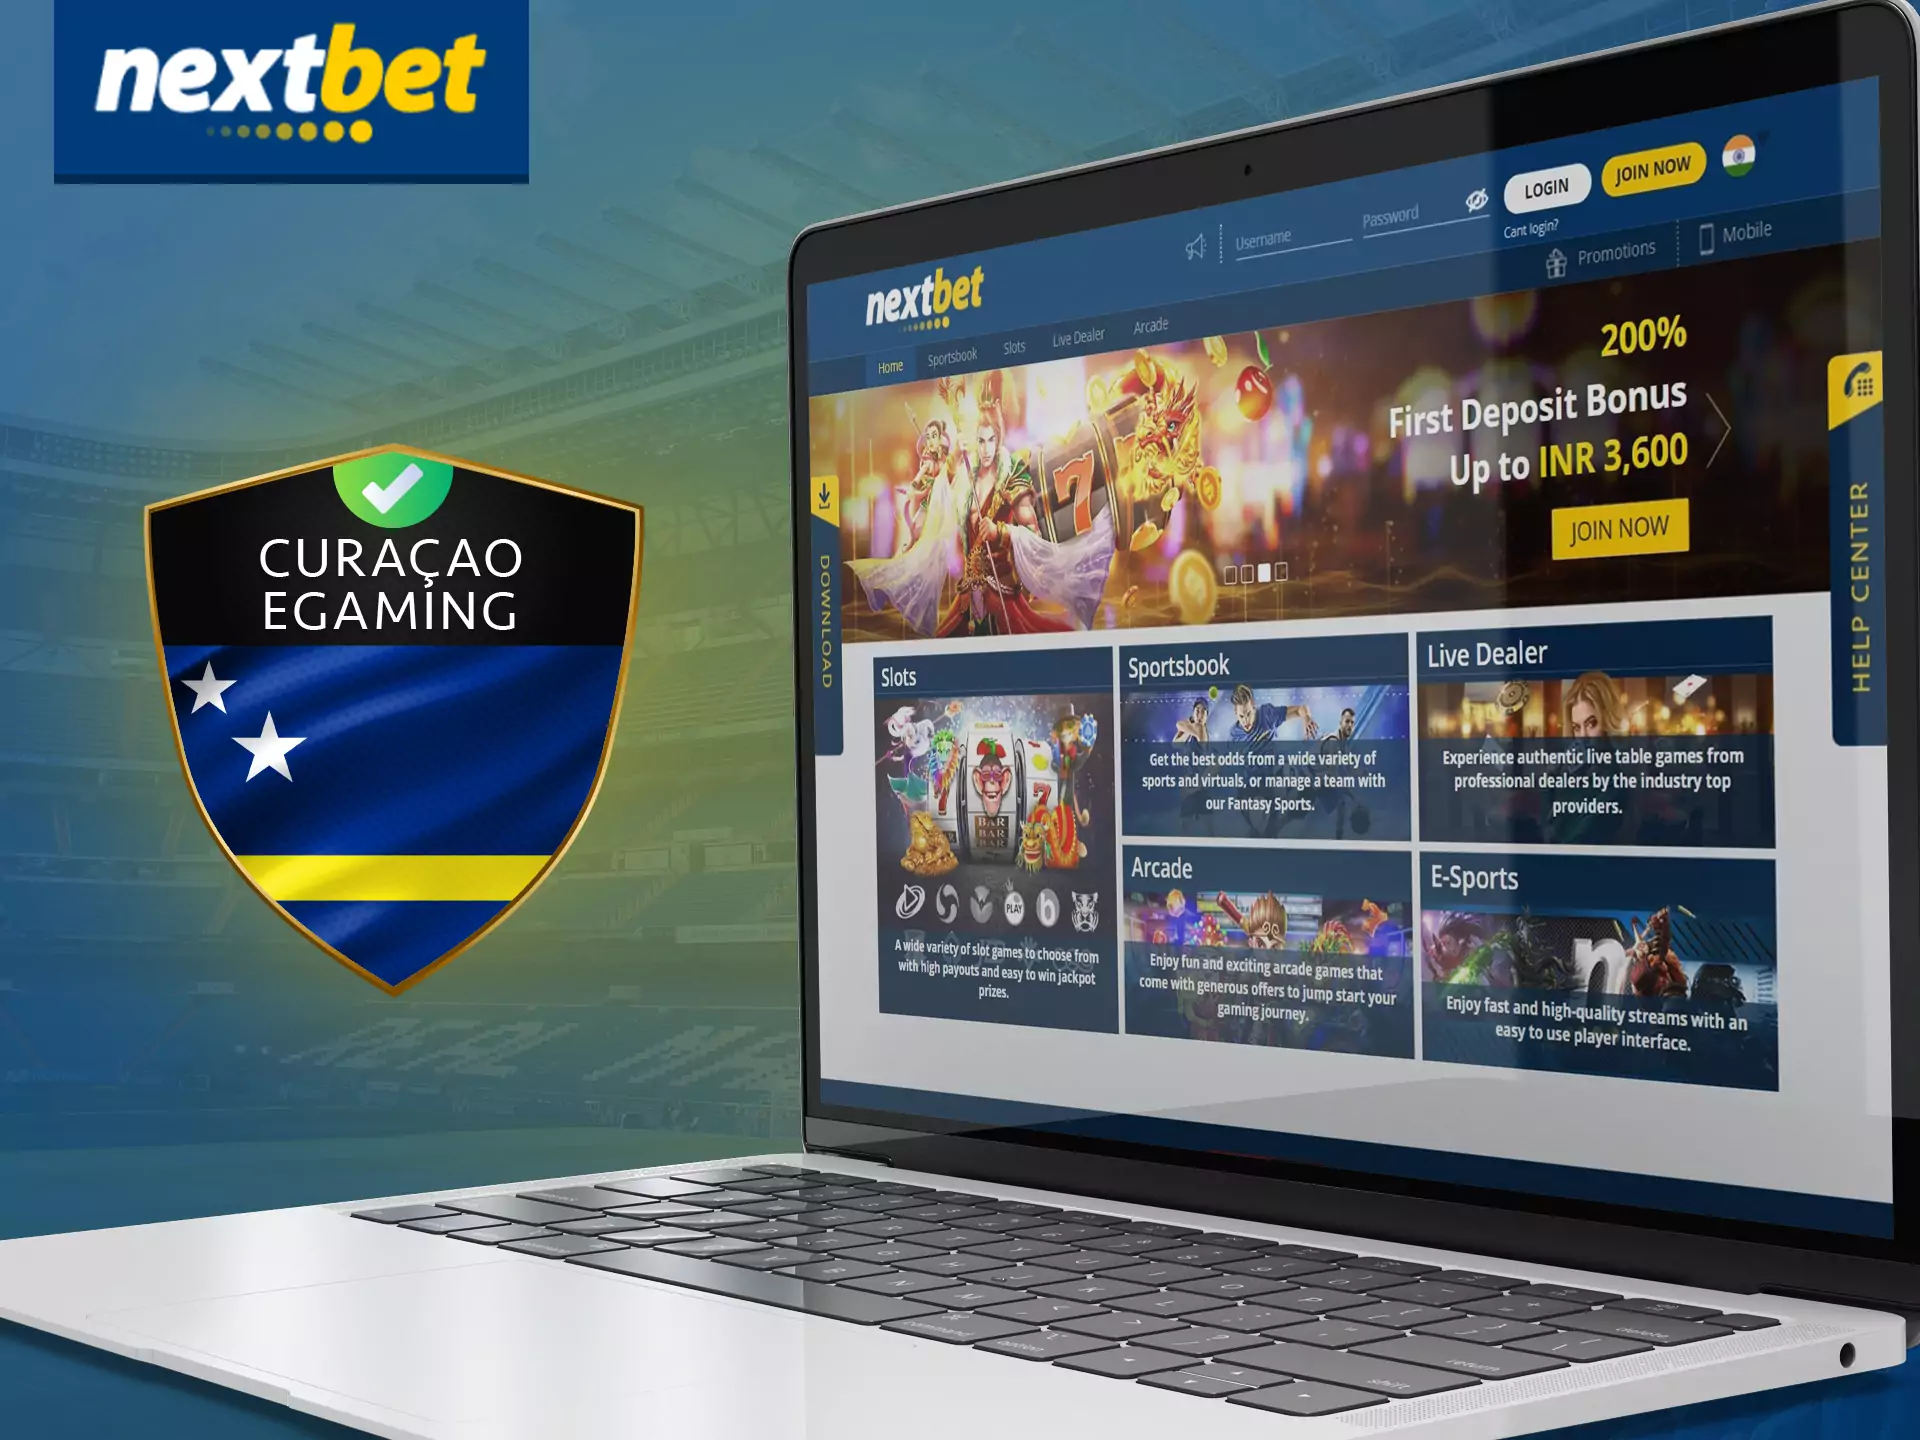 Nextbet service is absolutely legal for players and safe.